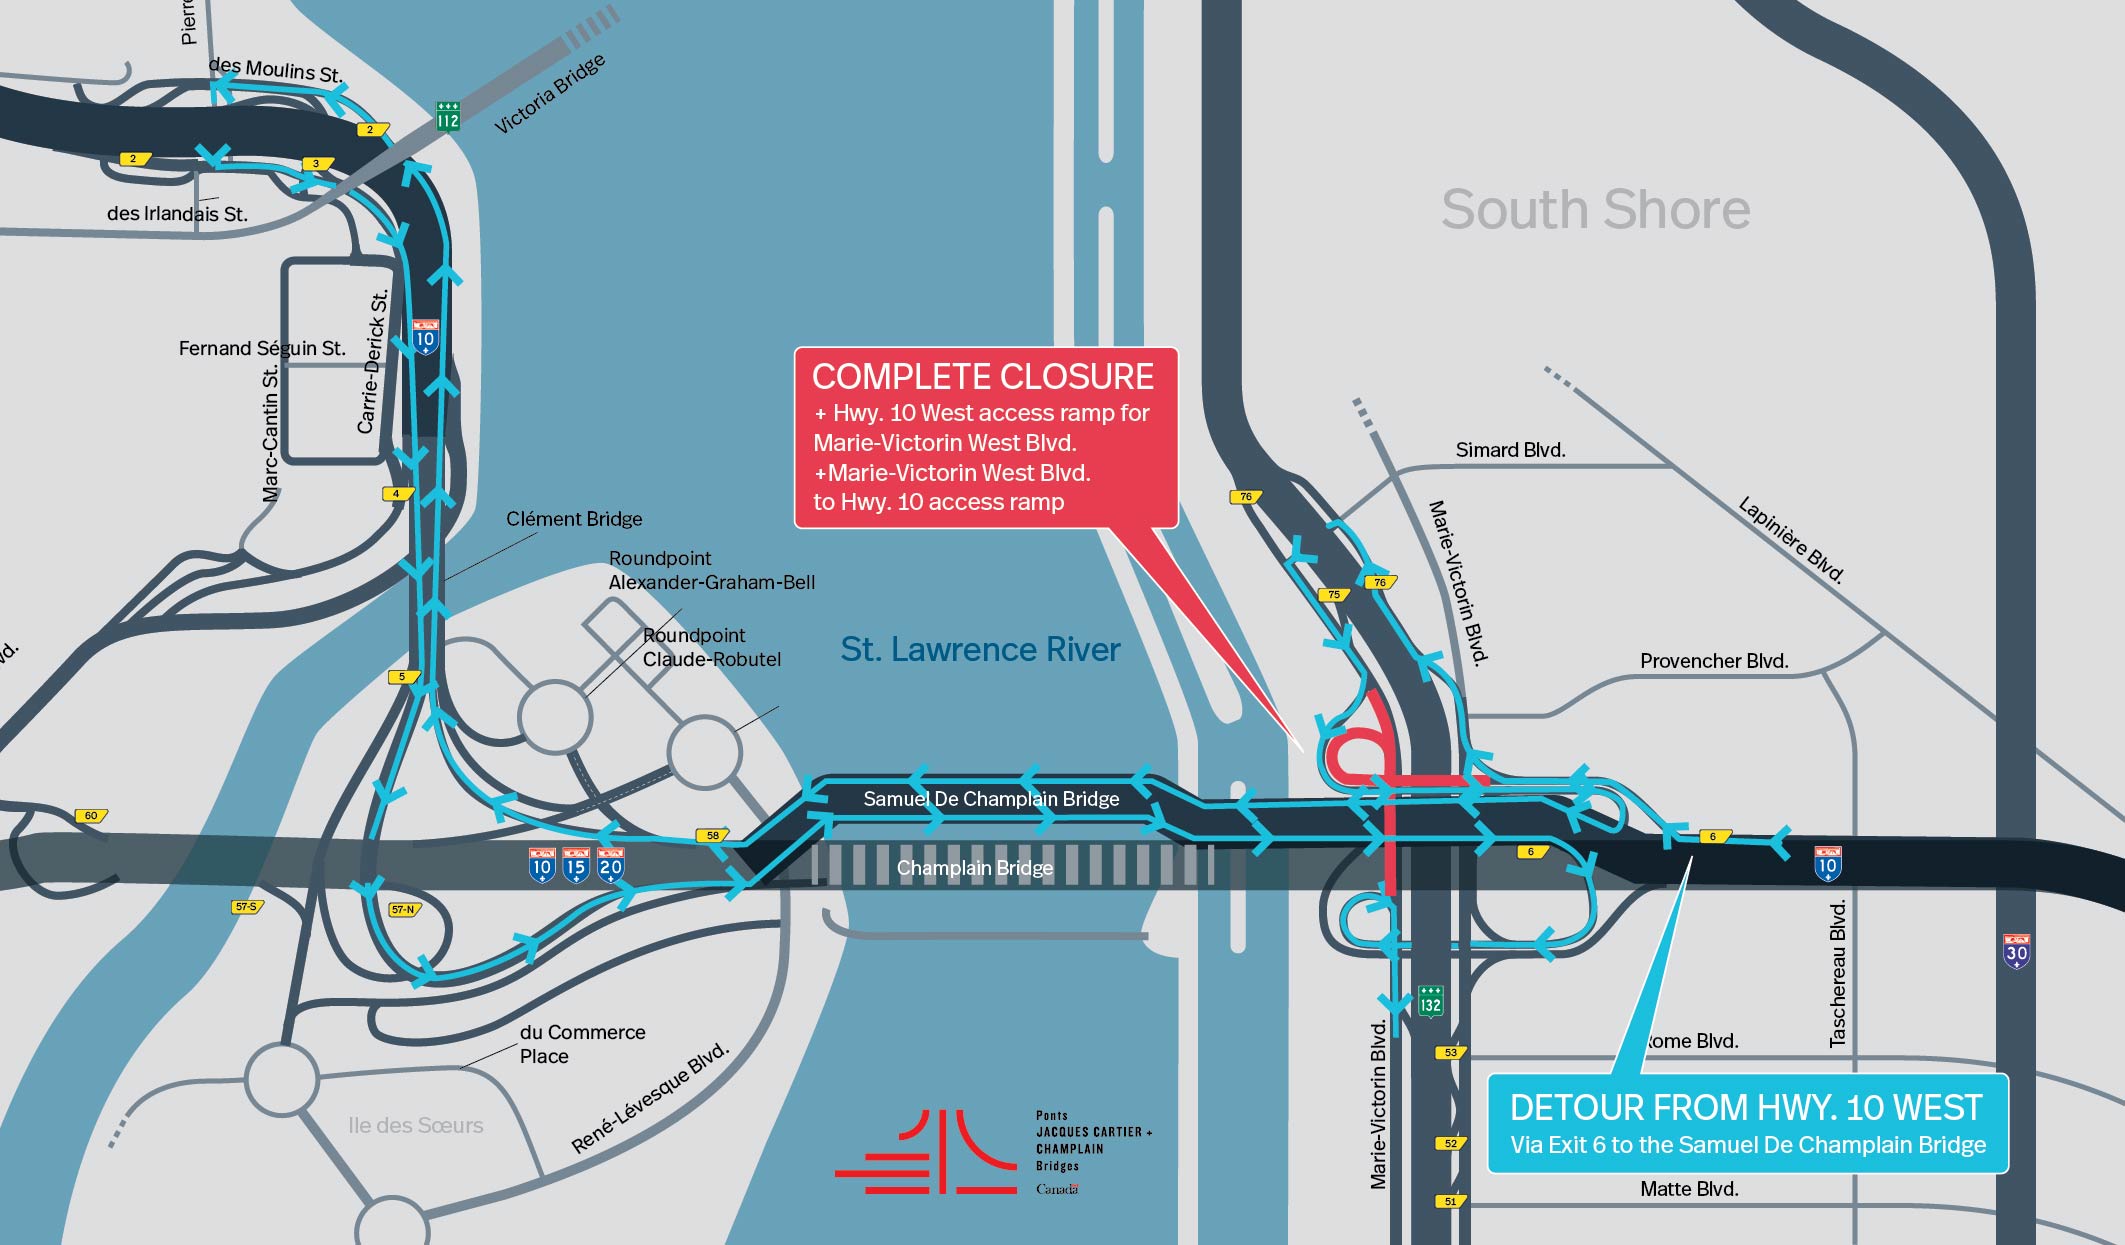 Brossard Sector | Complete closure of Marie-Victorin Blvd. West and from the Hwy. 10 West access ramp toward Blvd. Marie-Victorin West, on September 14